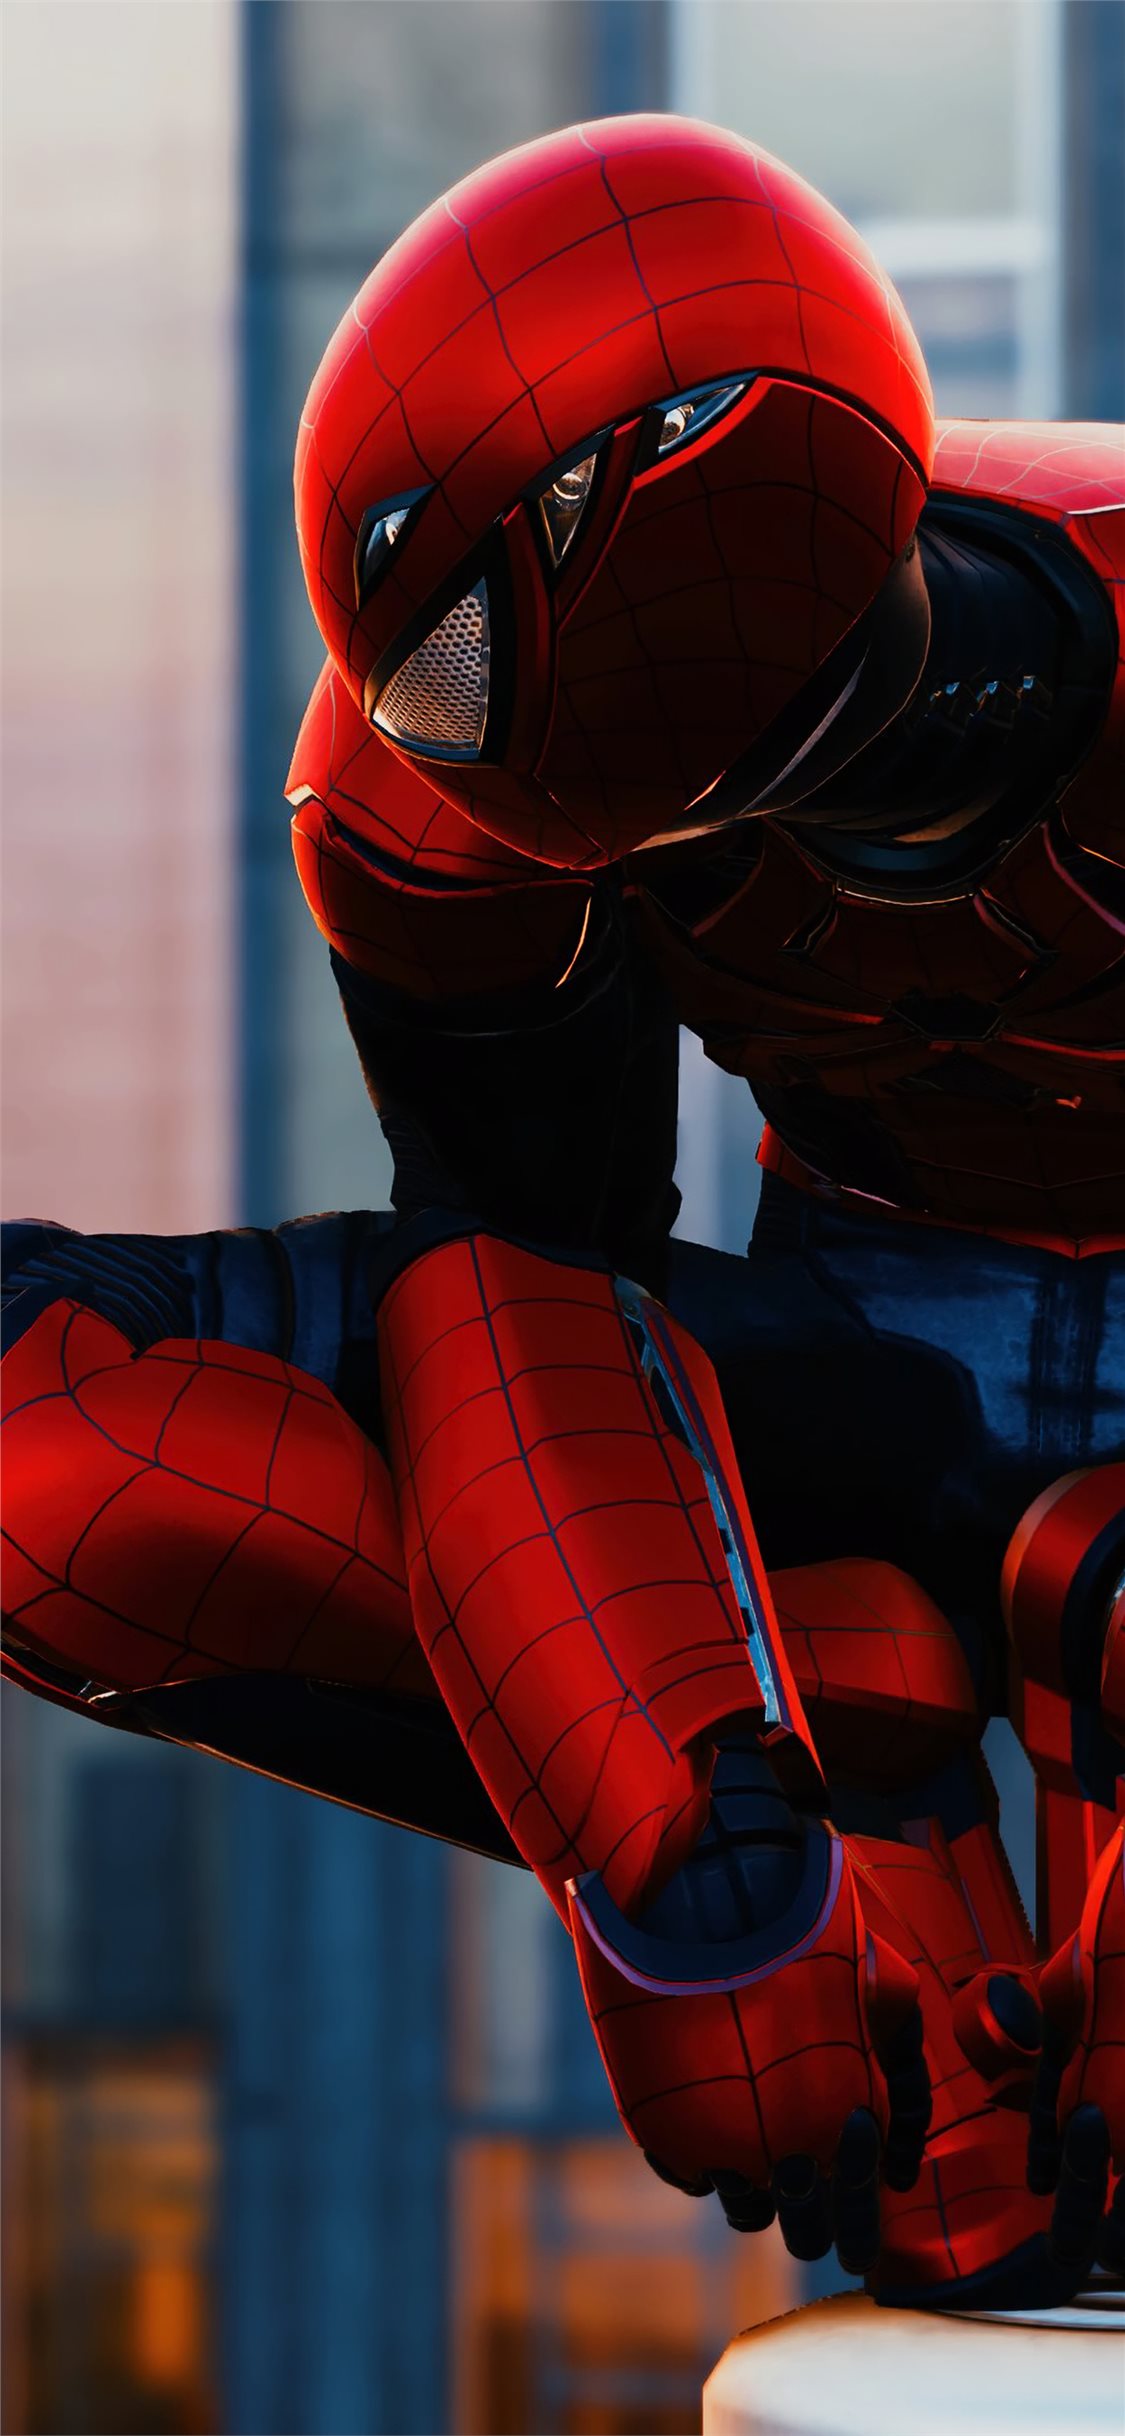 ps4 wallpaper,red,spider man,fictional character,superhero,suit actor